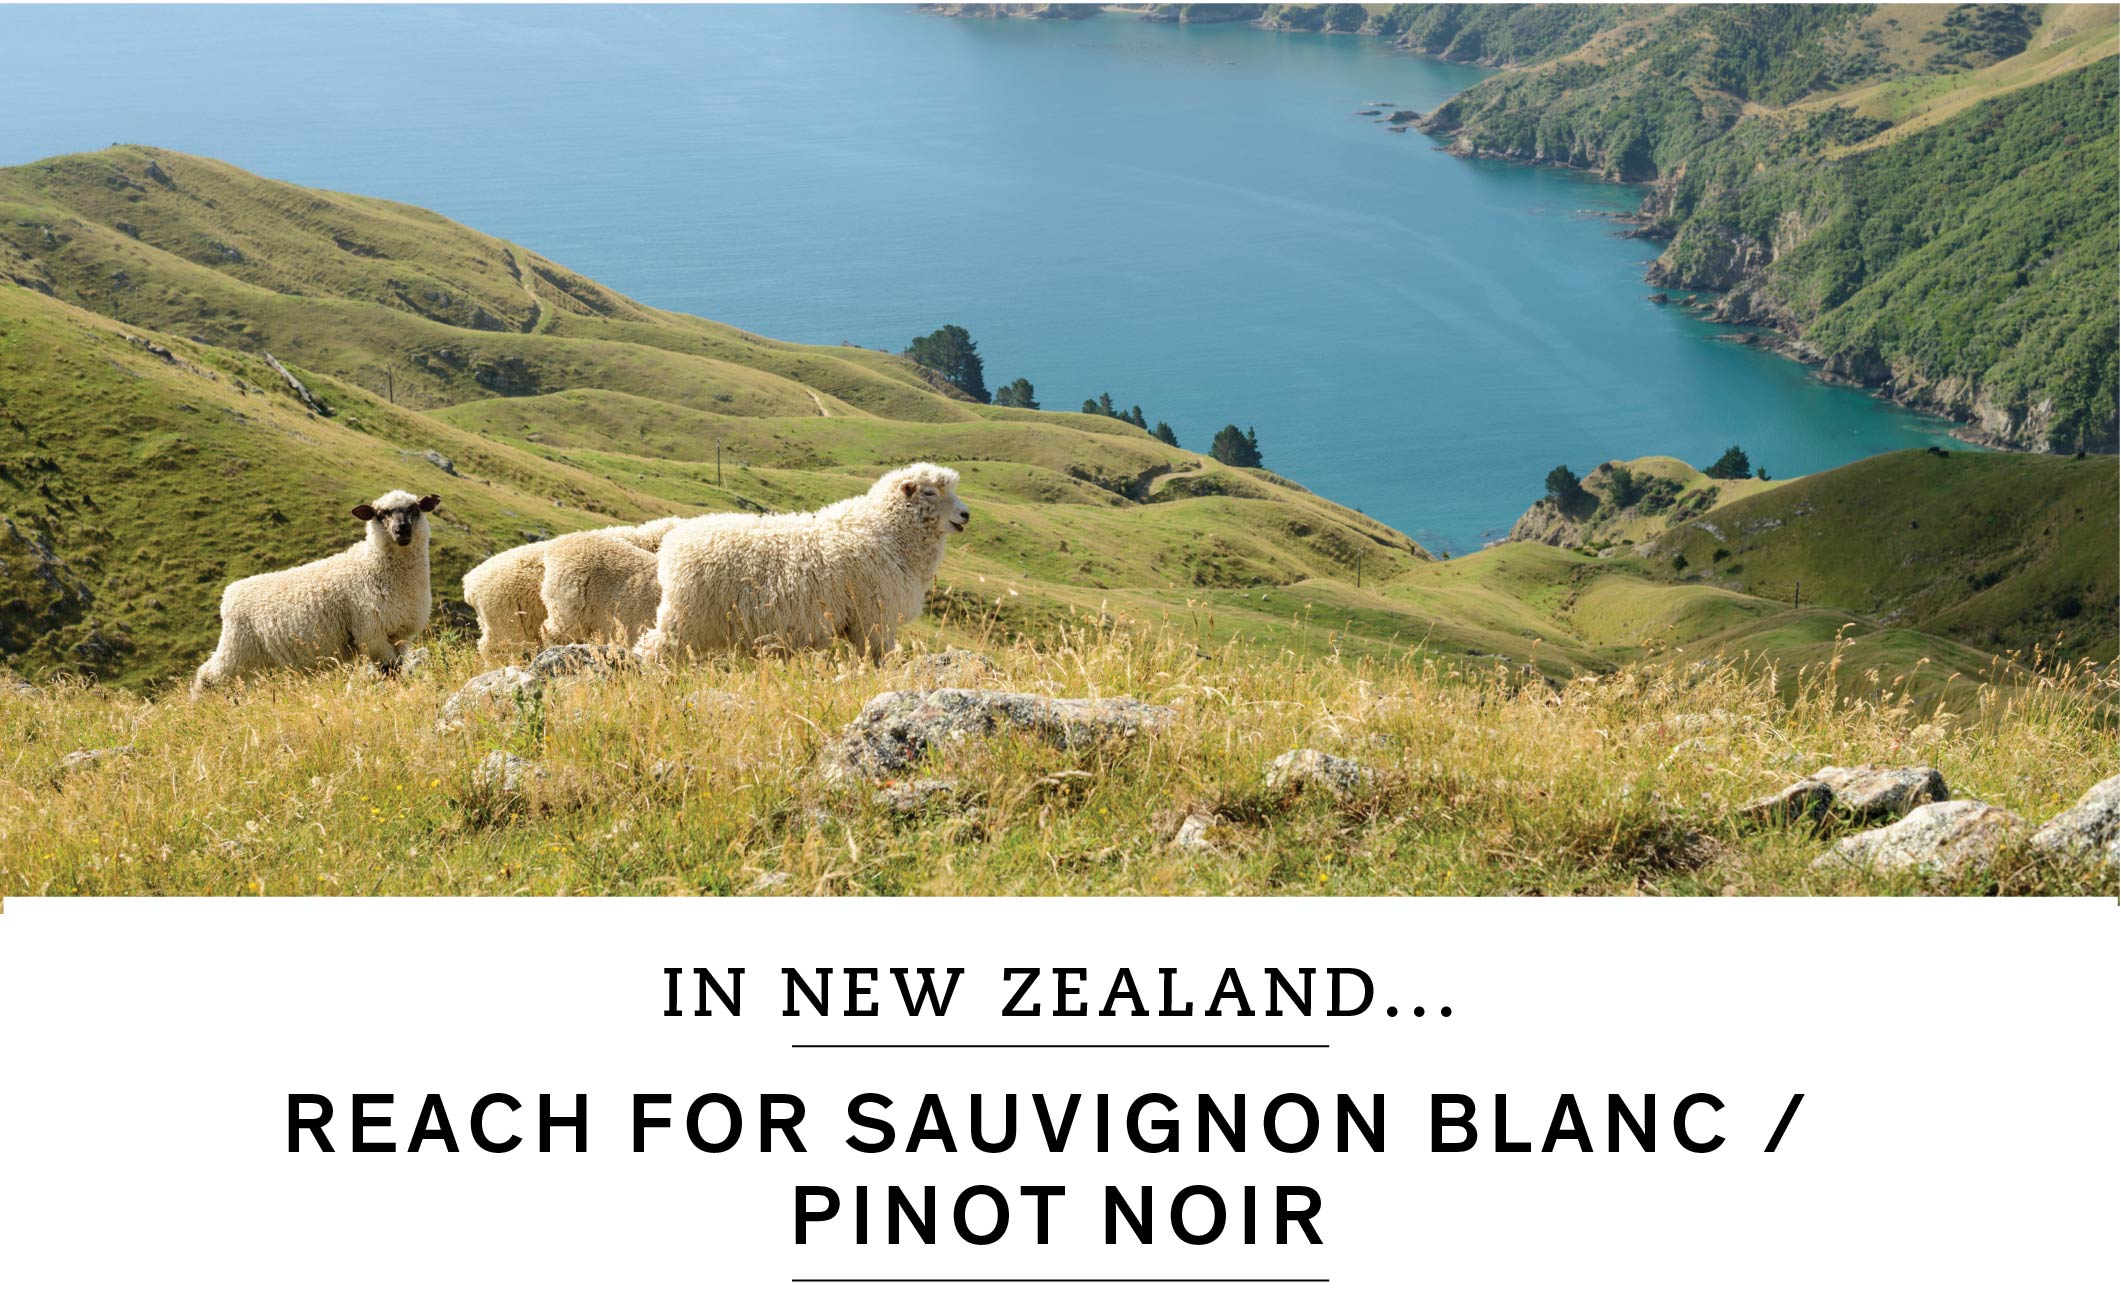 In New Zealand, reach for Sauvignon Blanc or Pinot Noir.